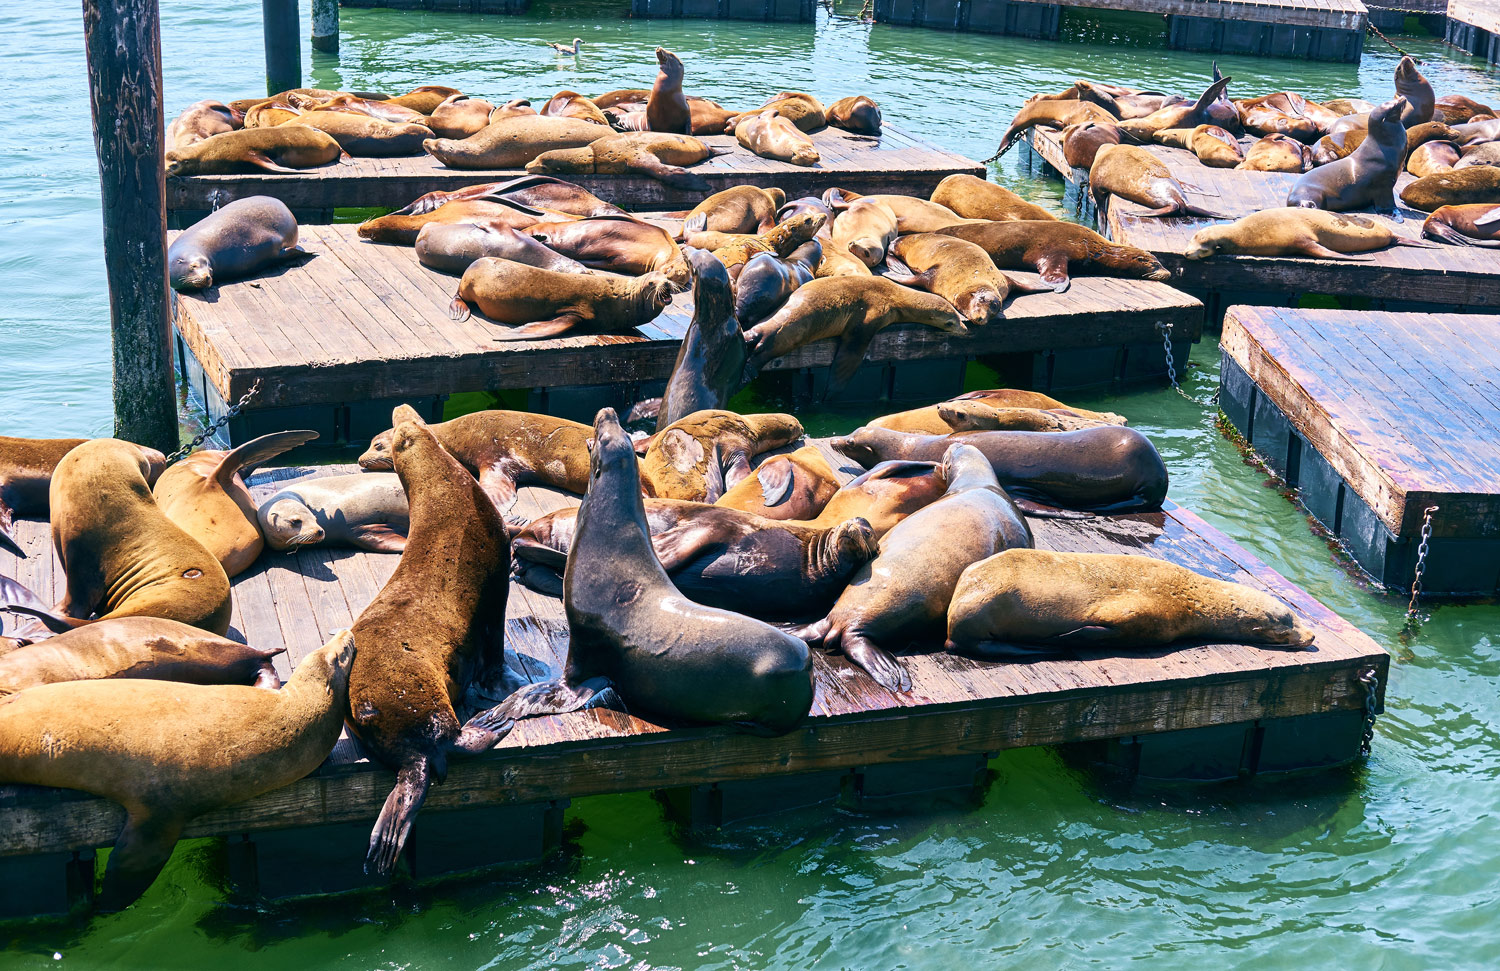 Everything You Need to Know About San Francisco's Sea Lions